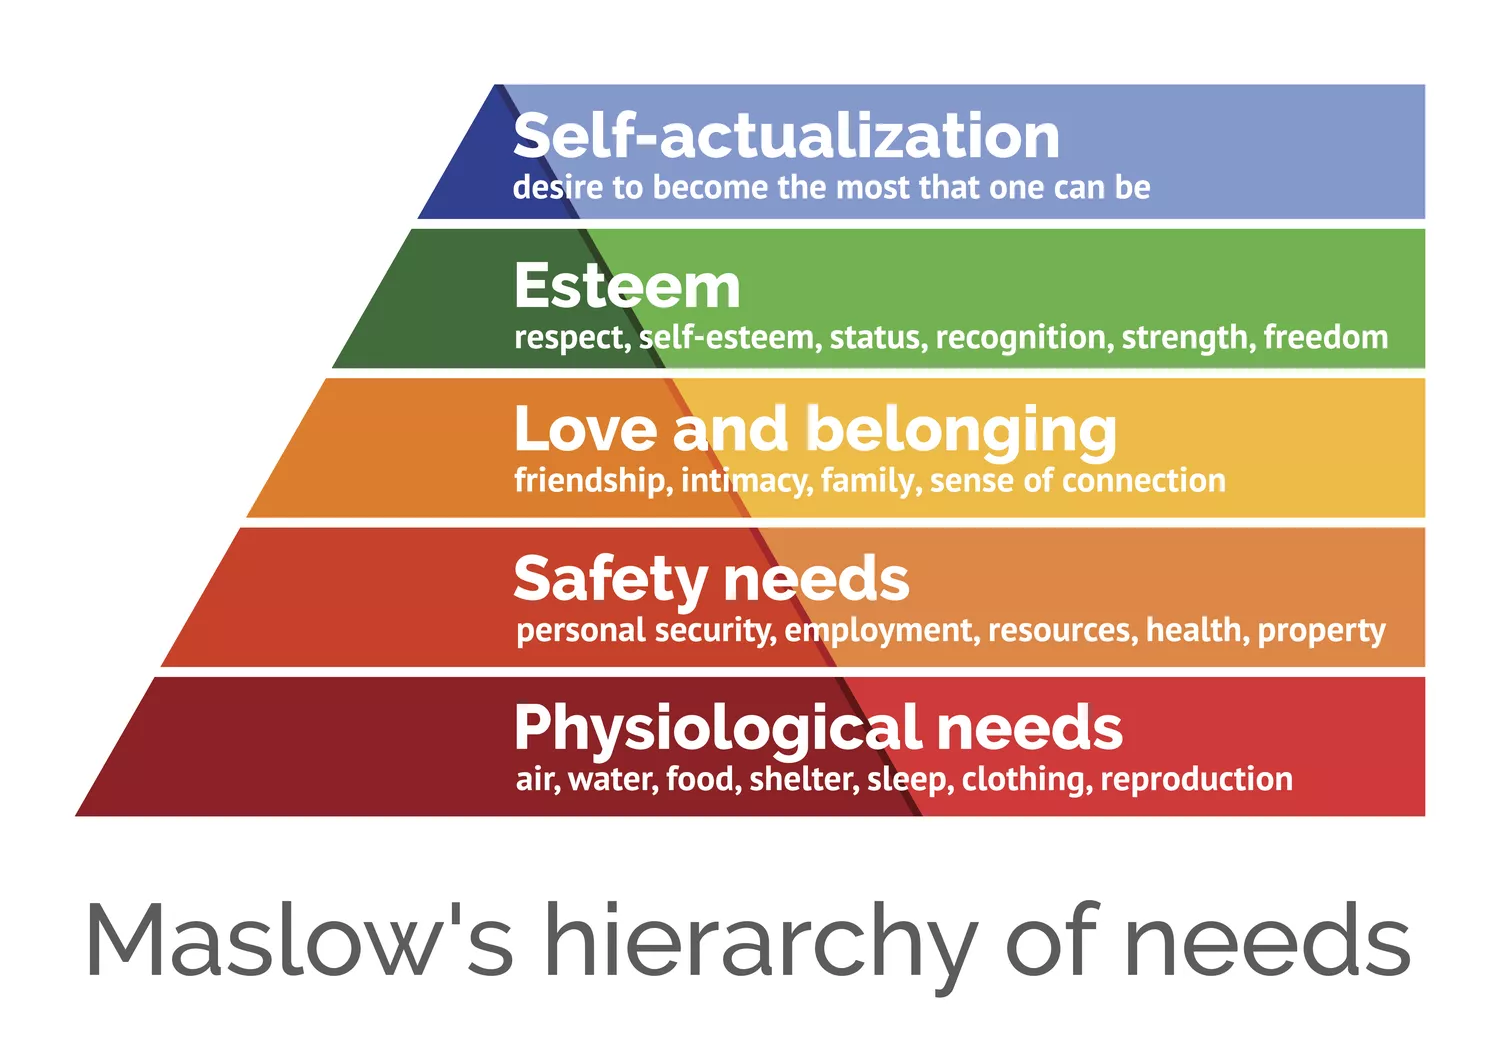 Image of Maslow's Hierachy of Needs